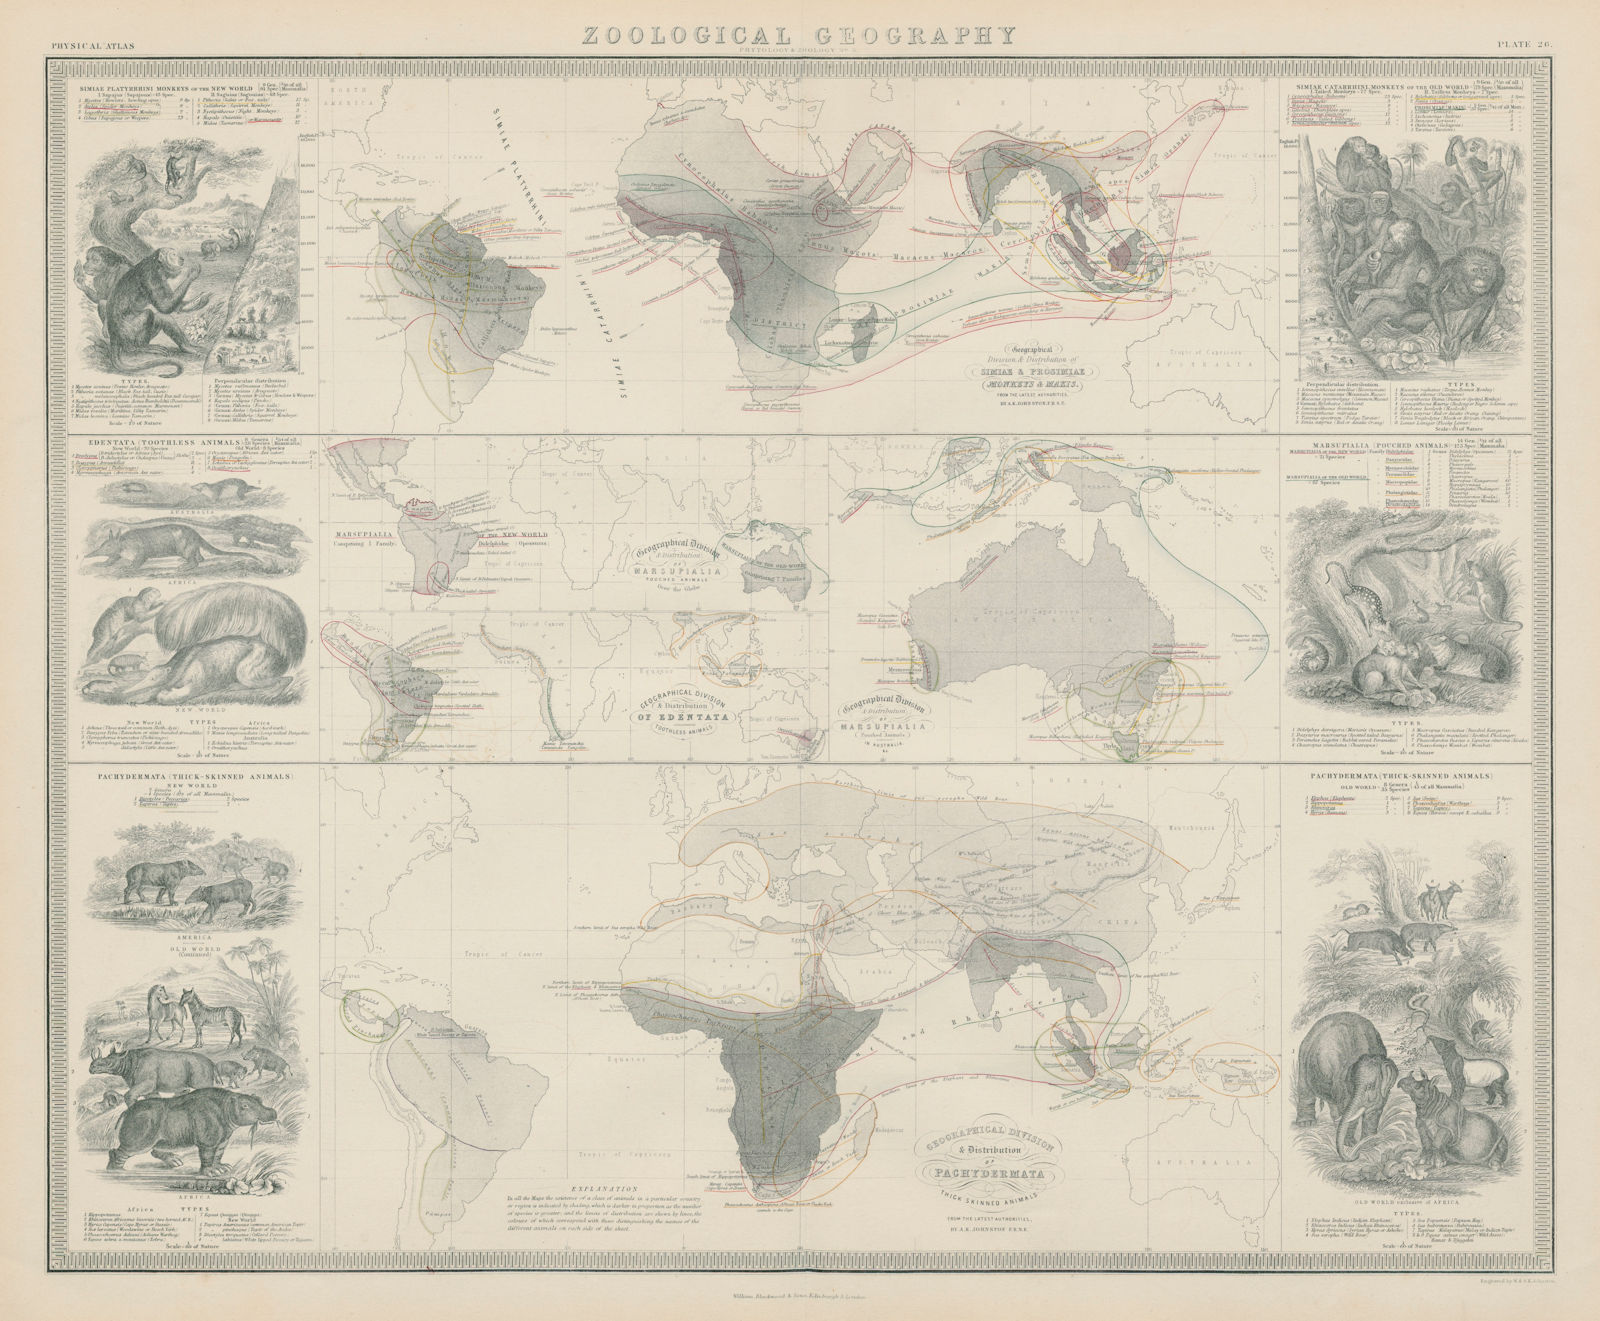 Zoological Geography. Pachydermata - thick-skinned animals distribution 1856 map